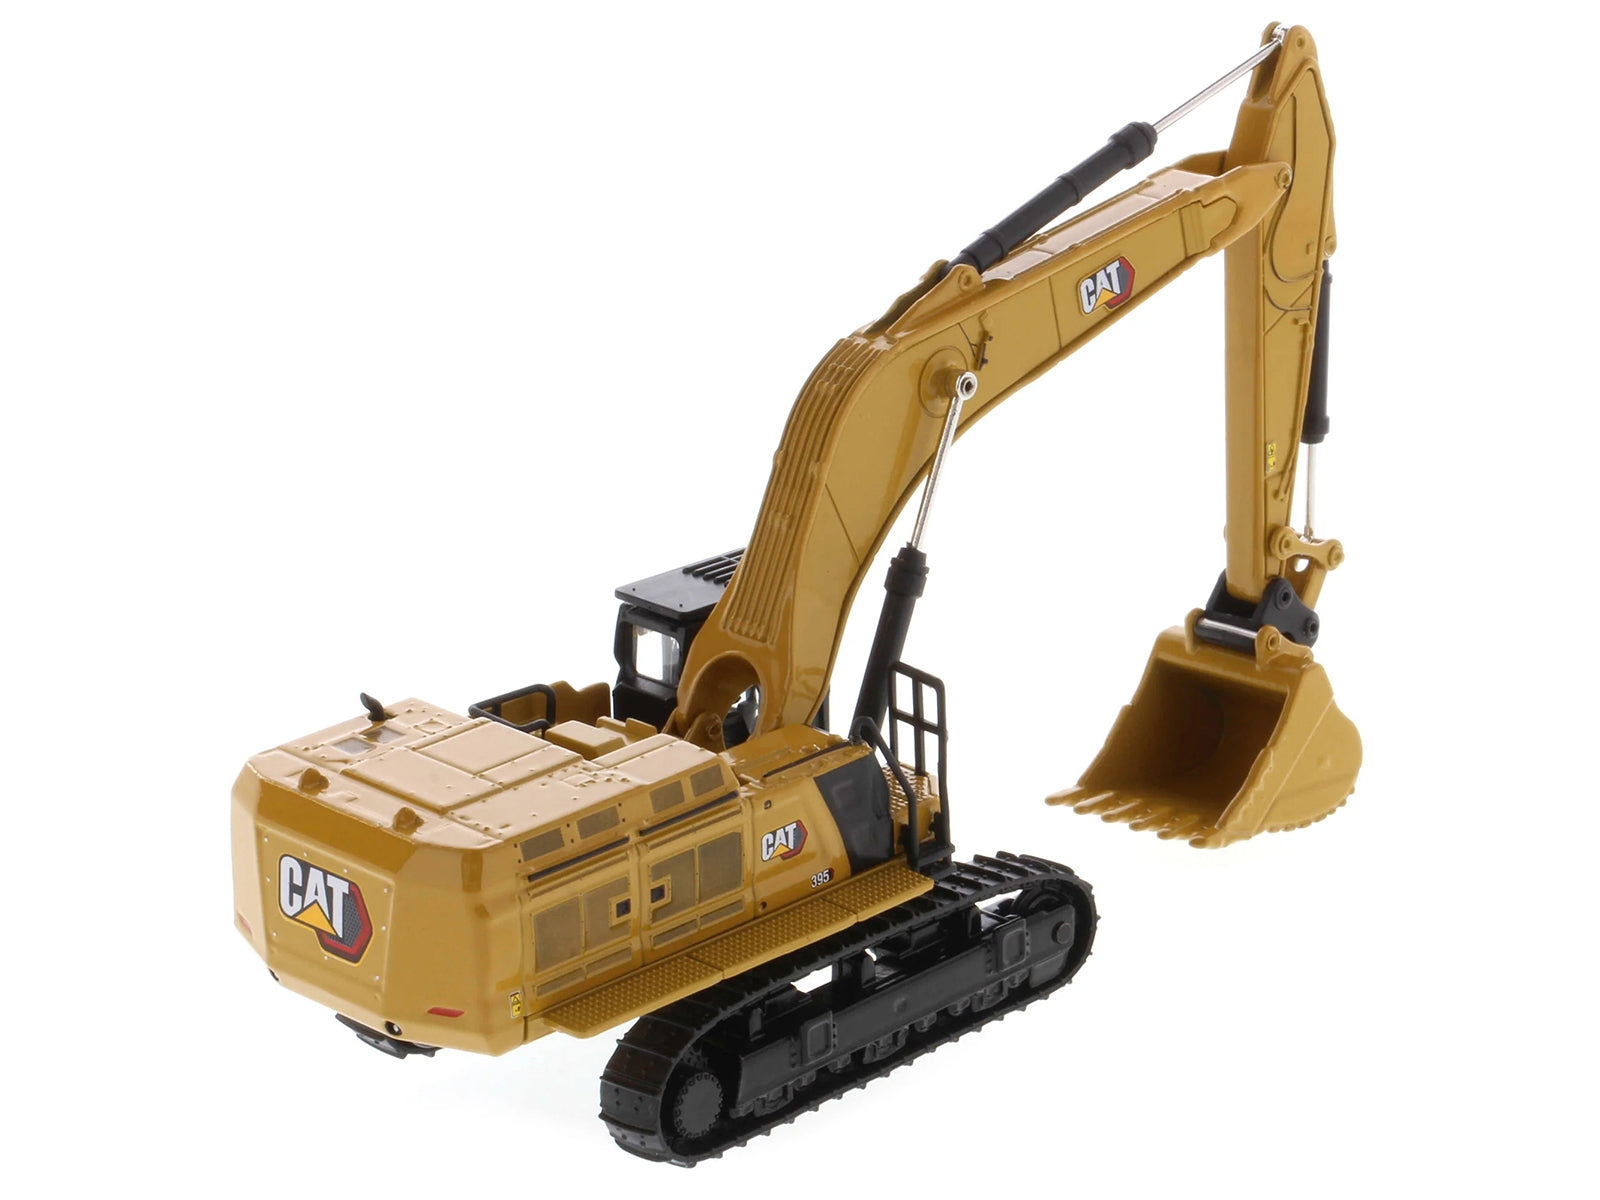 CAT Caterpillar 395 Next-Generation Hydraulic Excavator (General Purpose Version) Yellow with Additional Tools "High Line Series" 1/87 (HO) Diecast Model by Diecast Masters Diecast Masters